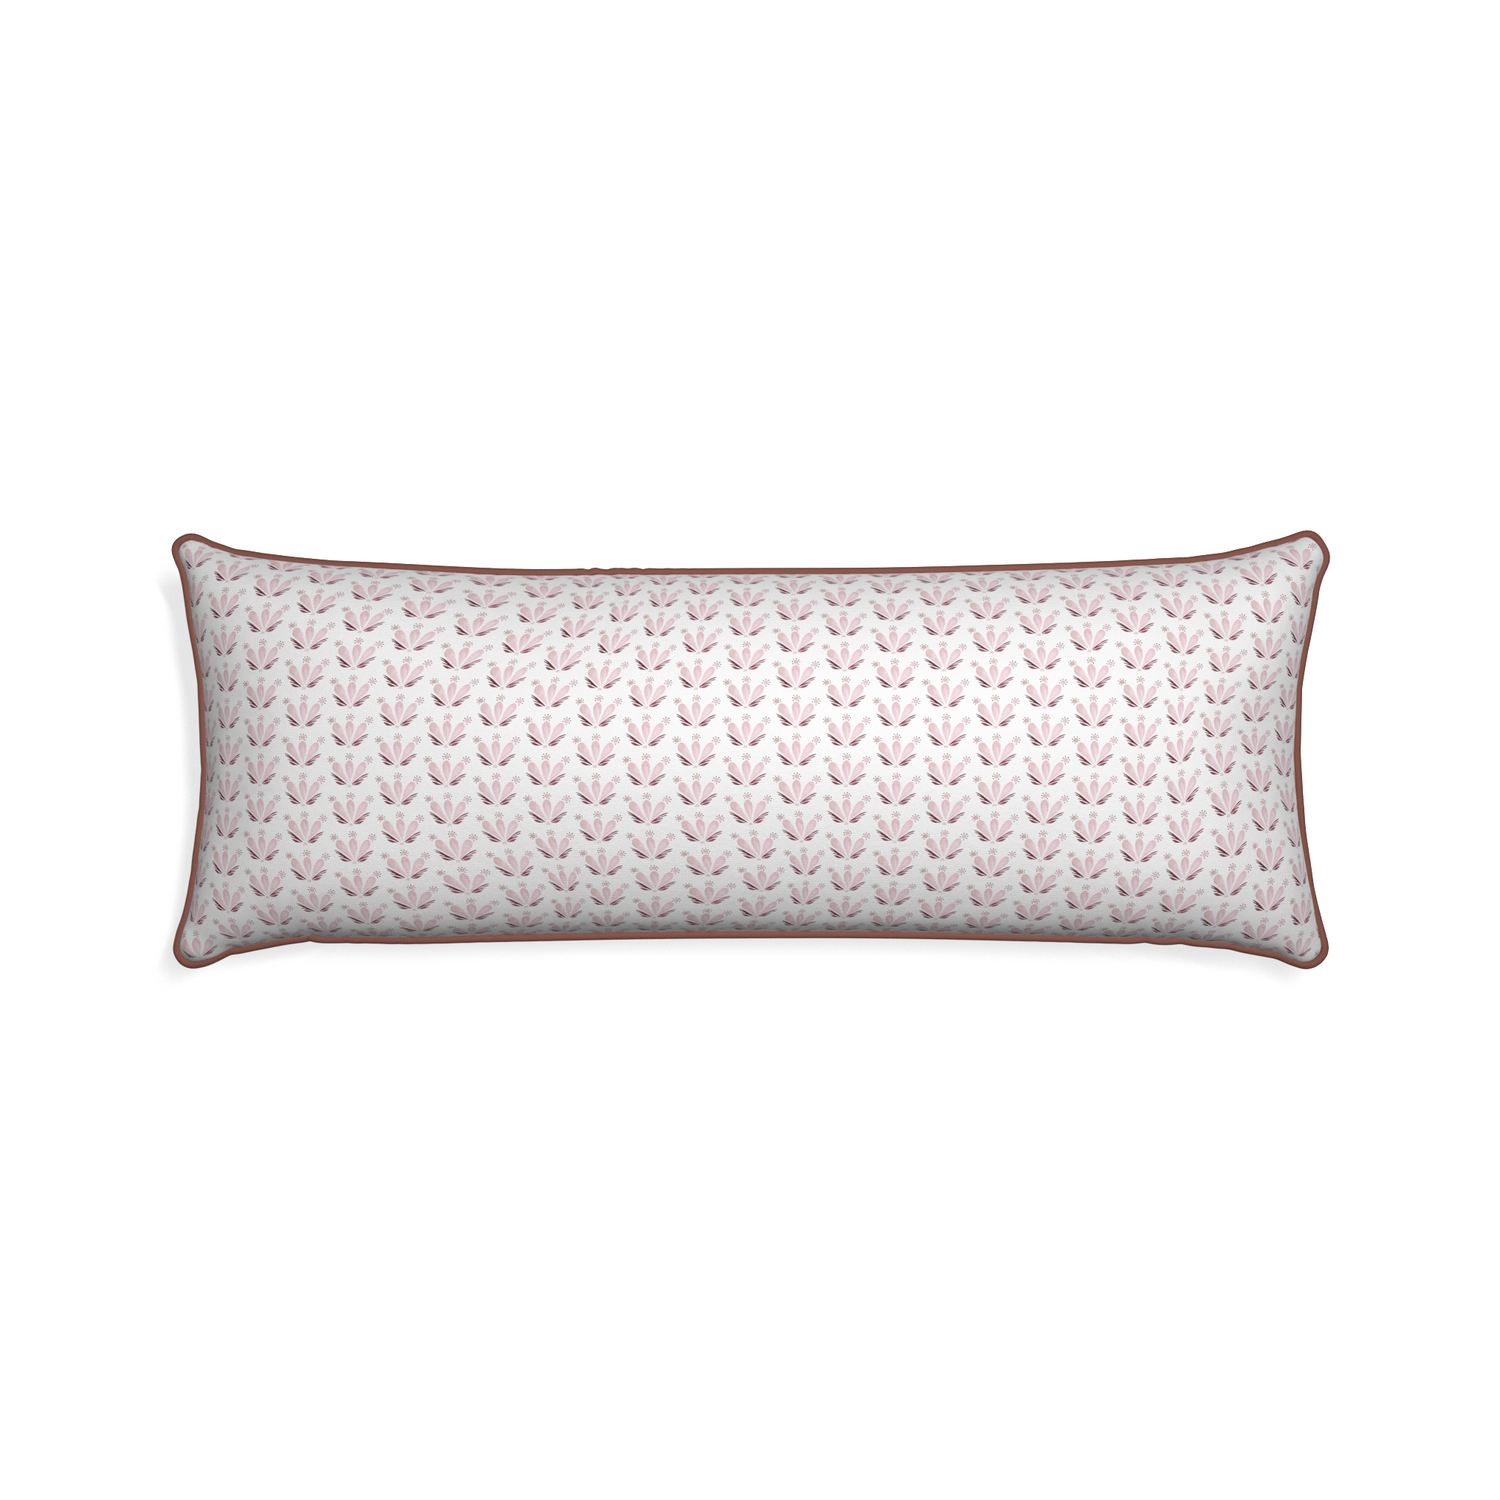 Xl-lumbar serena pink custom pink & burgundy drop repeat floralpillow with w piping on white background